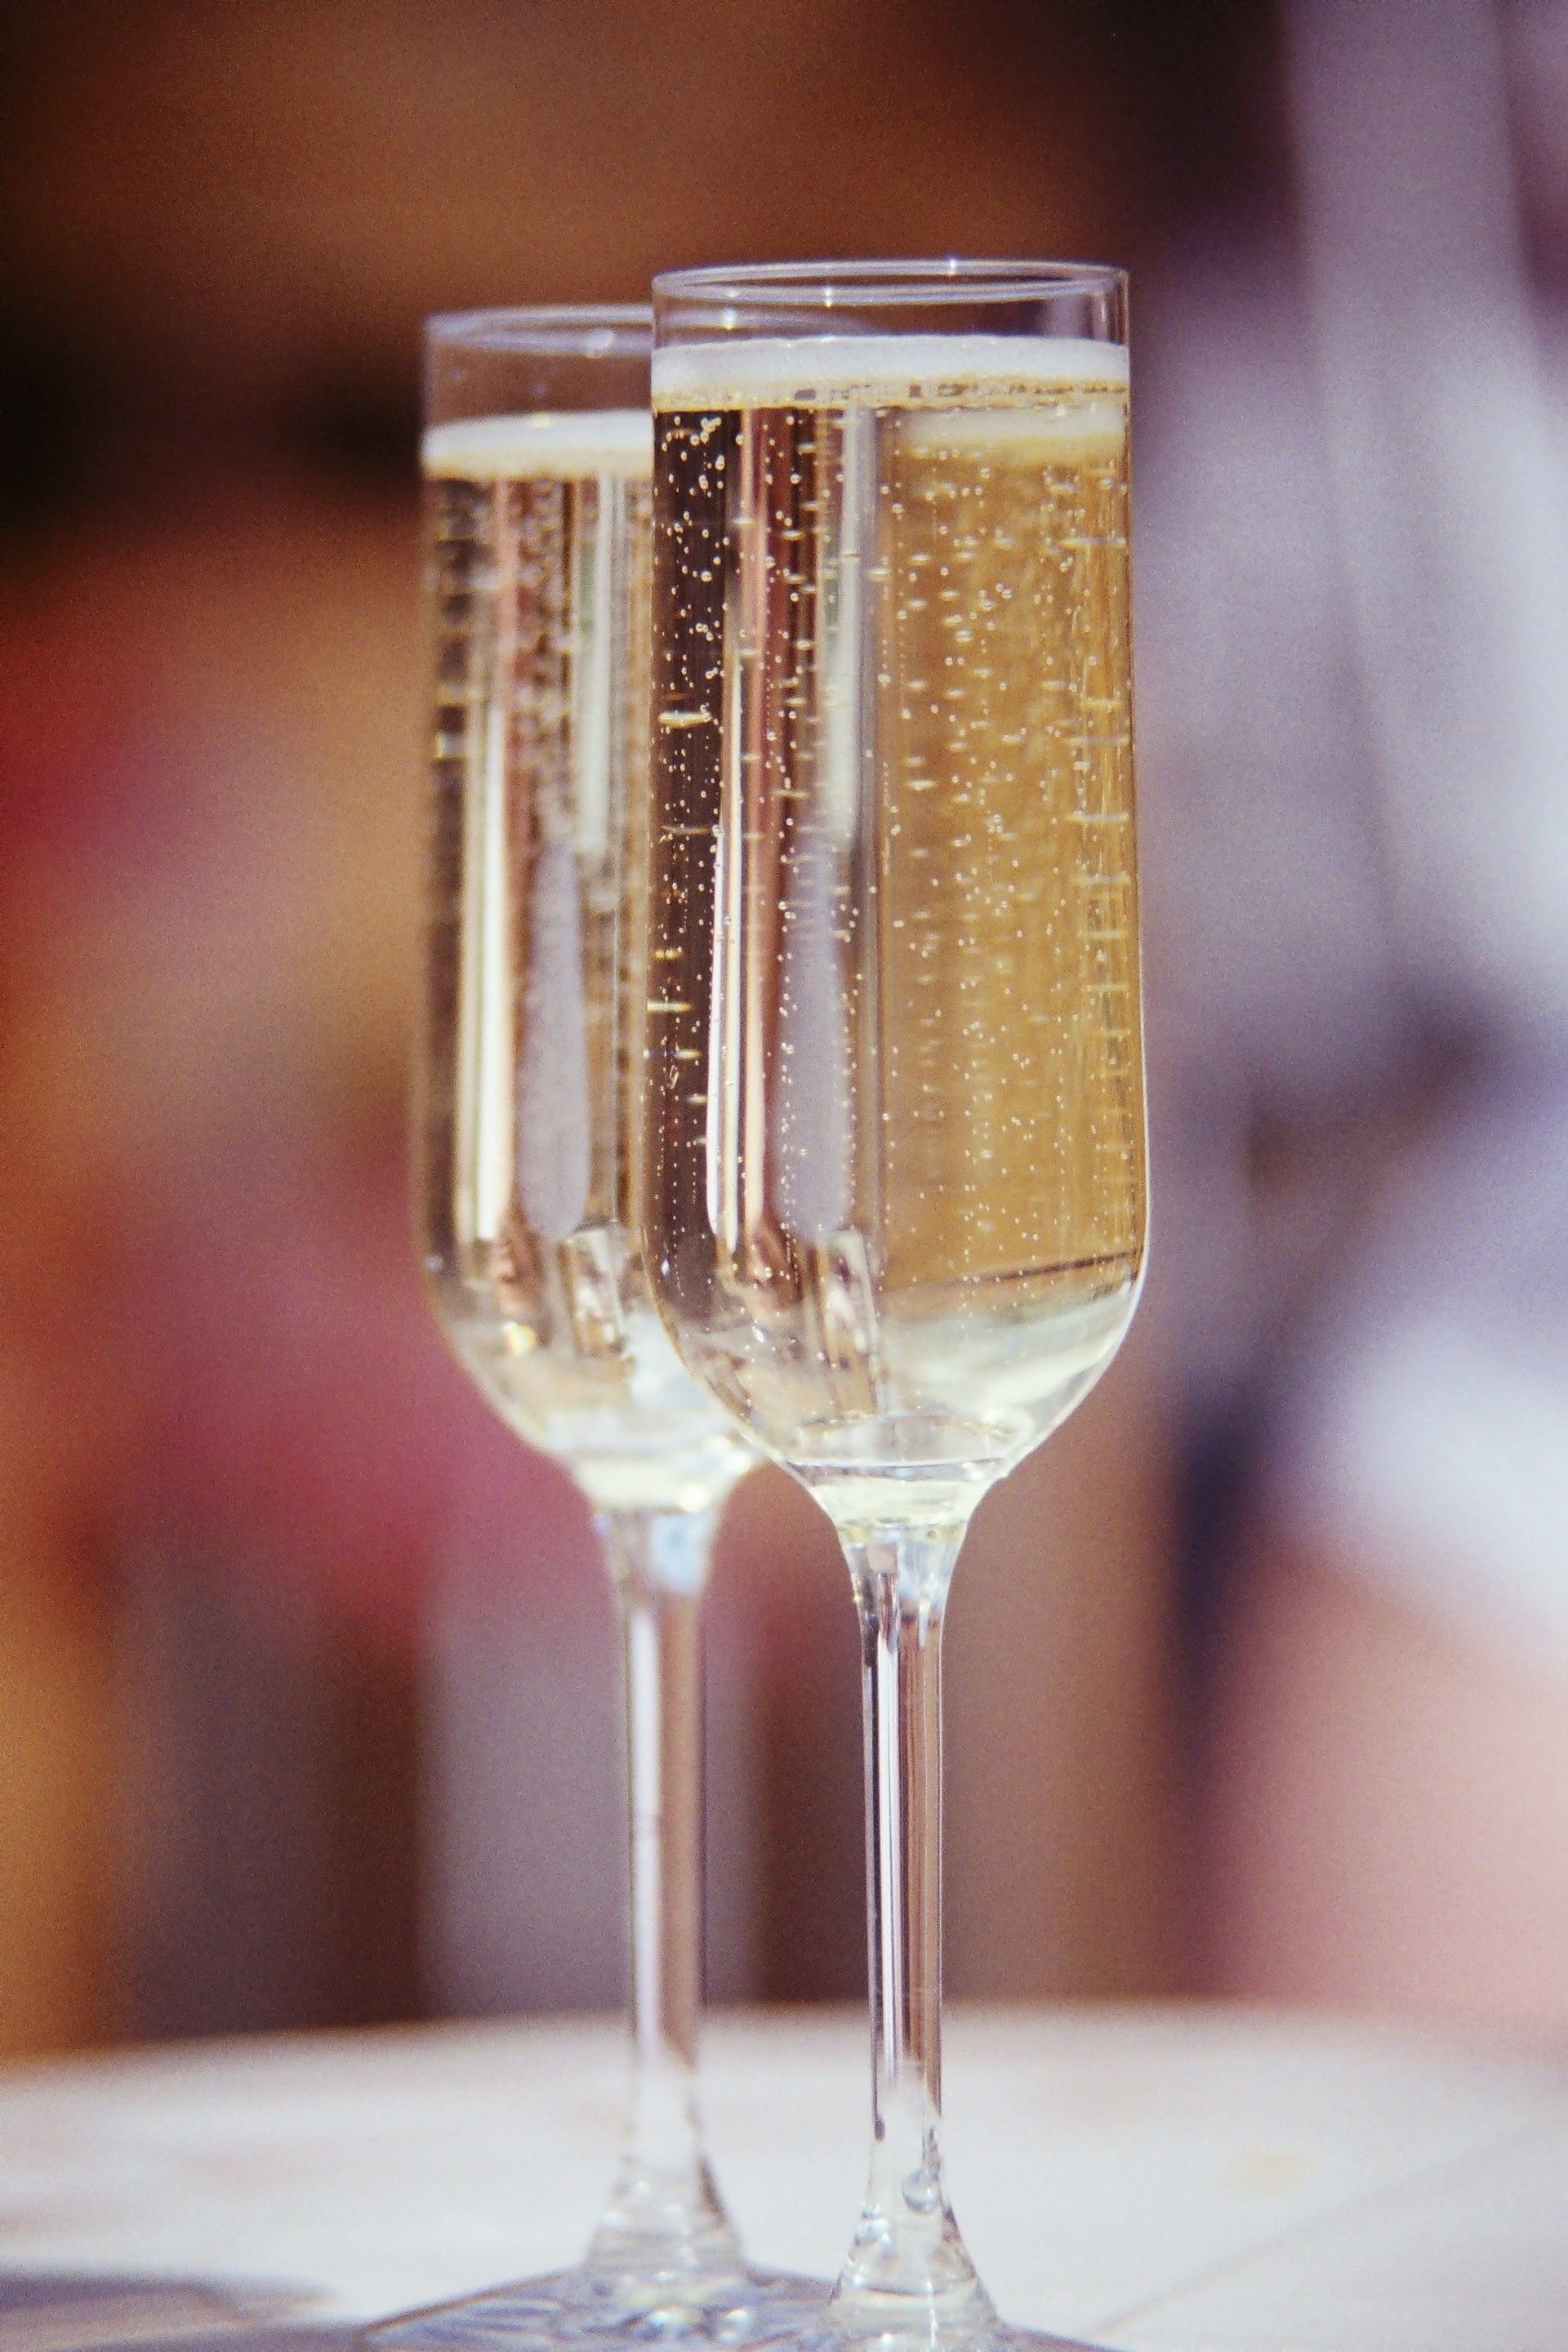 Two glasses of champagne | Source: Unsplash